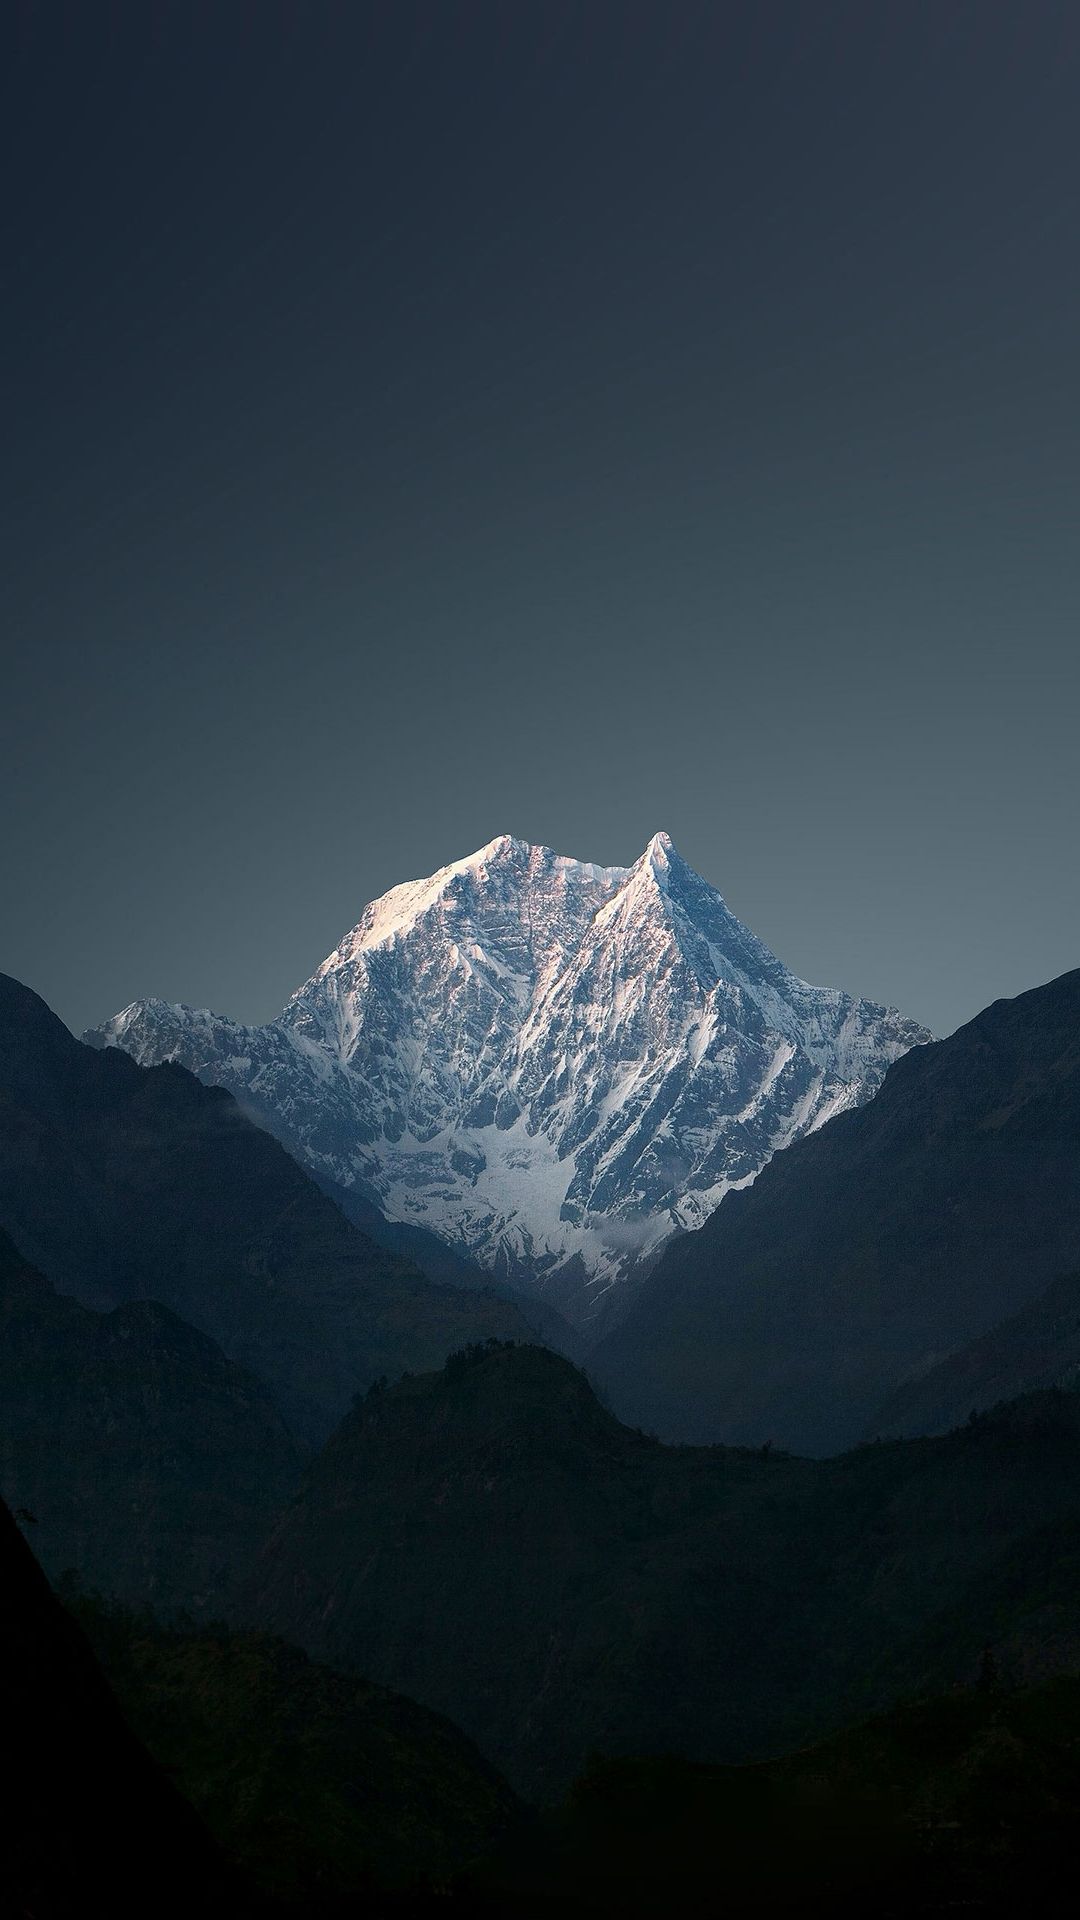 Meizu M2 Note Wallpaper: Mount Everest Android Wallpaper